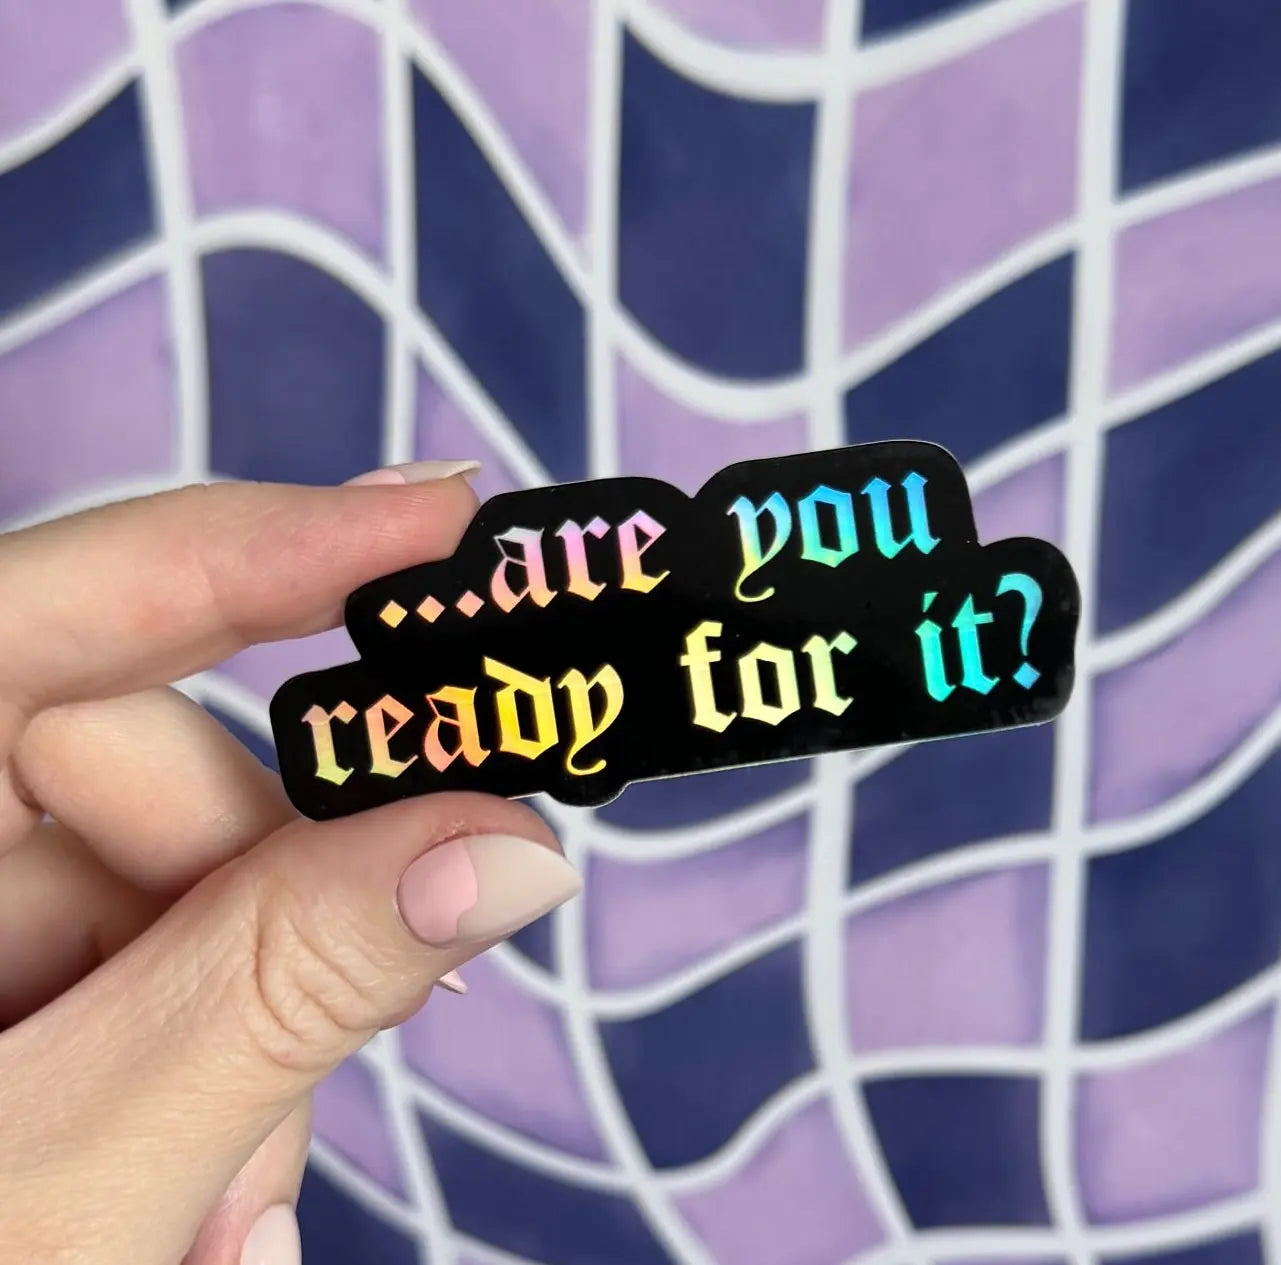 Are you ready for it? sticker MangoIllustrated